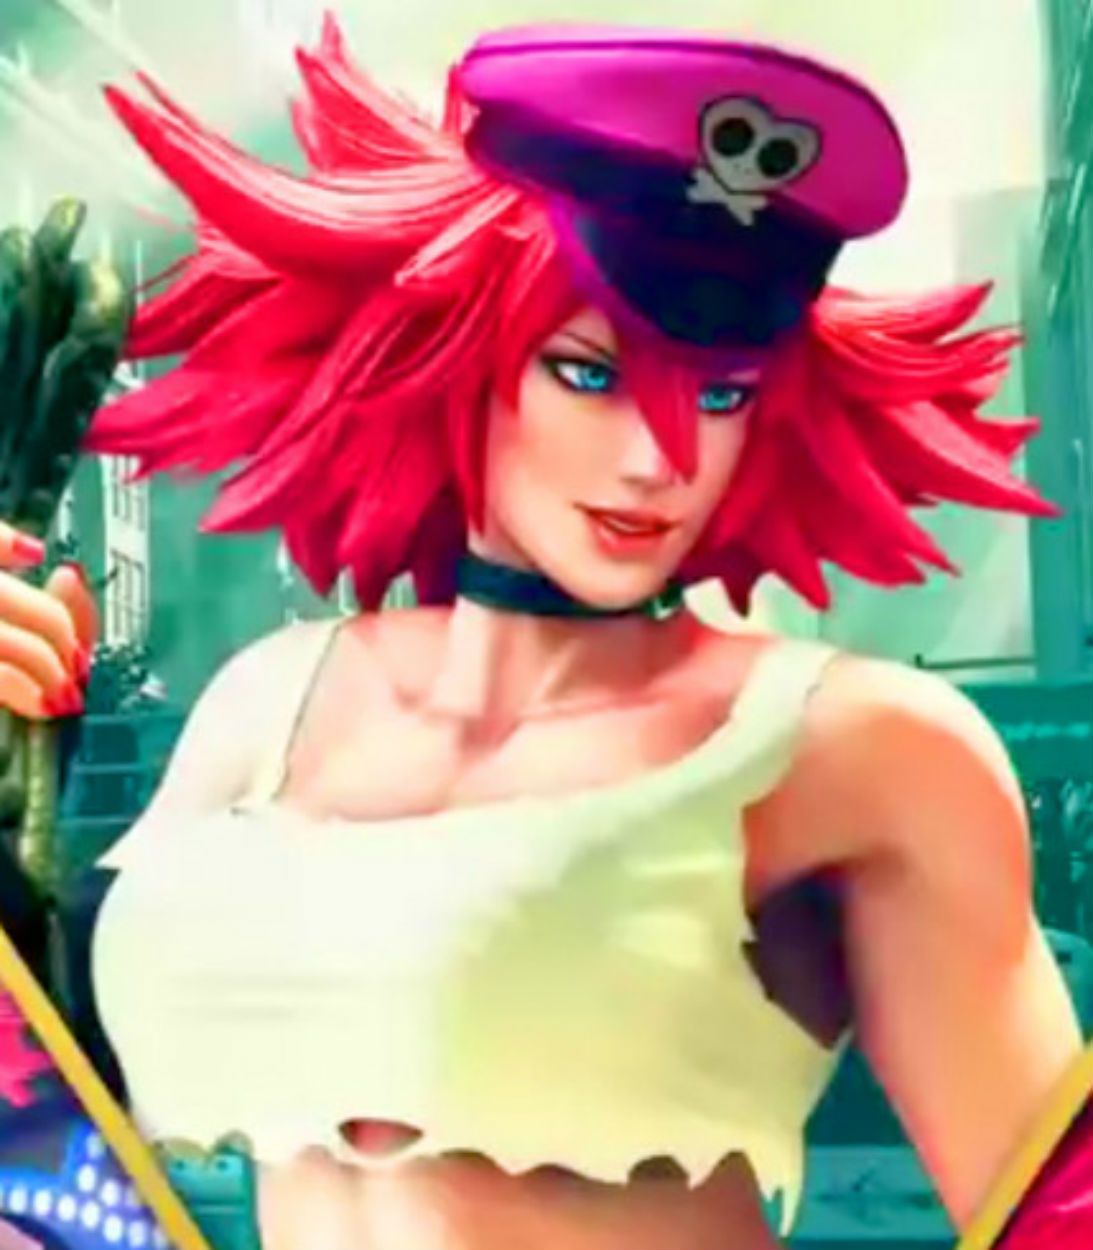 Poison's costume in Street Fighter 5